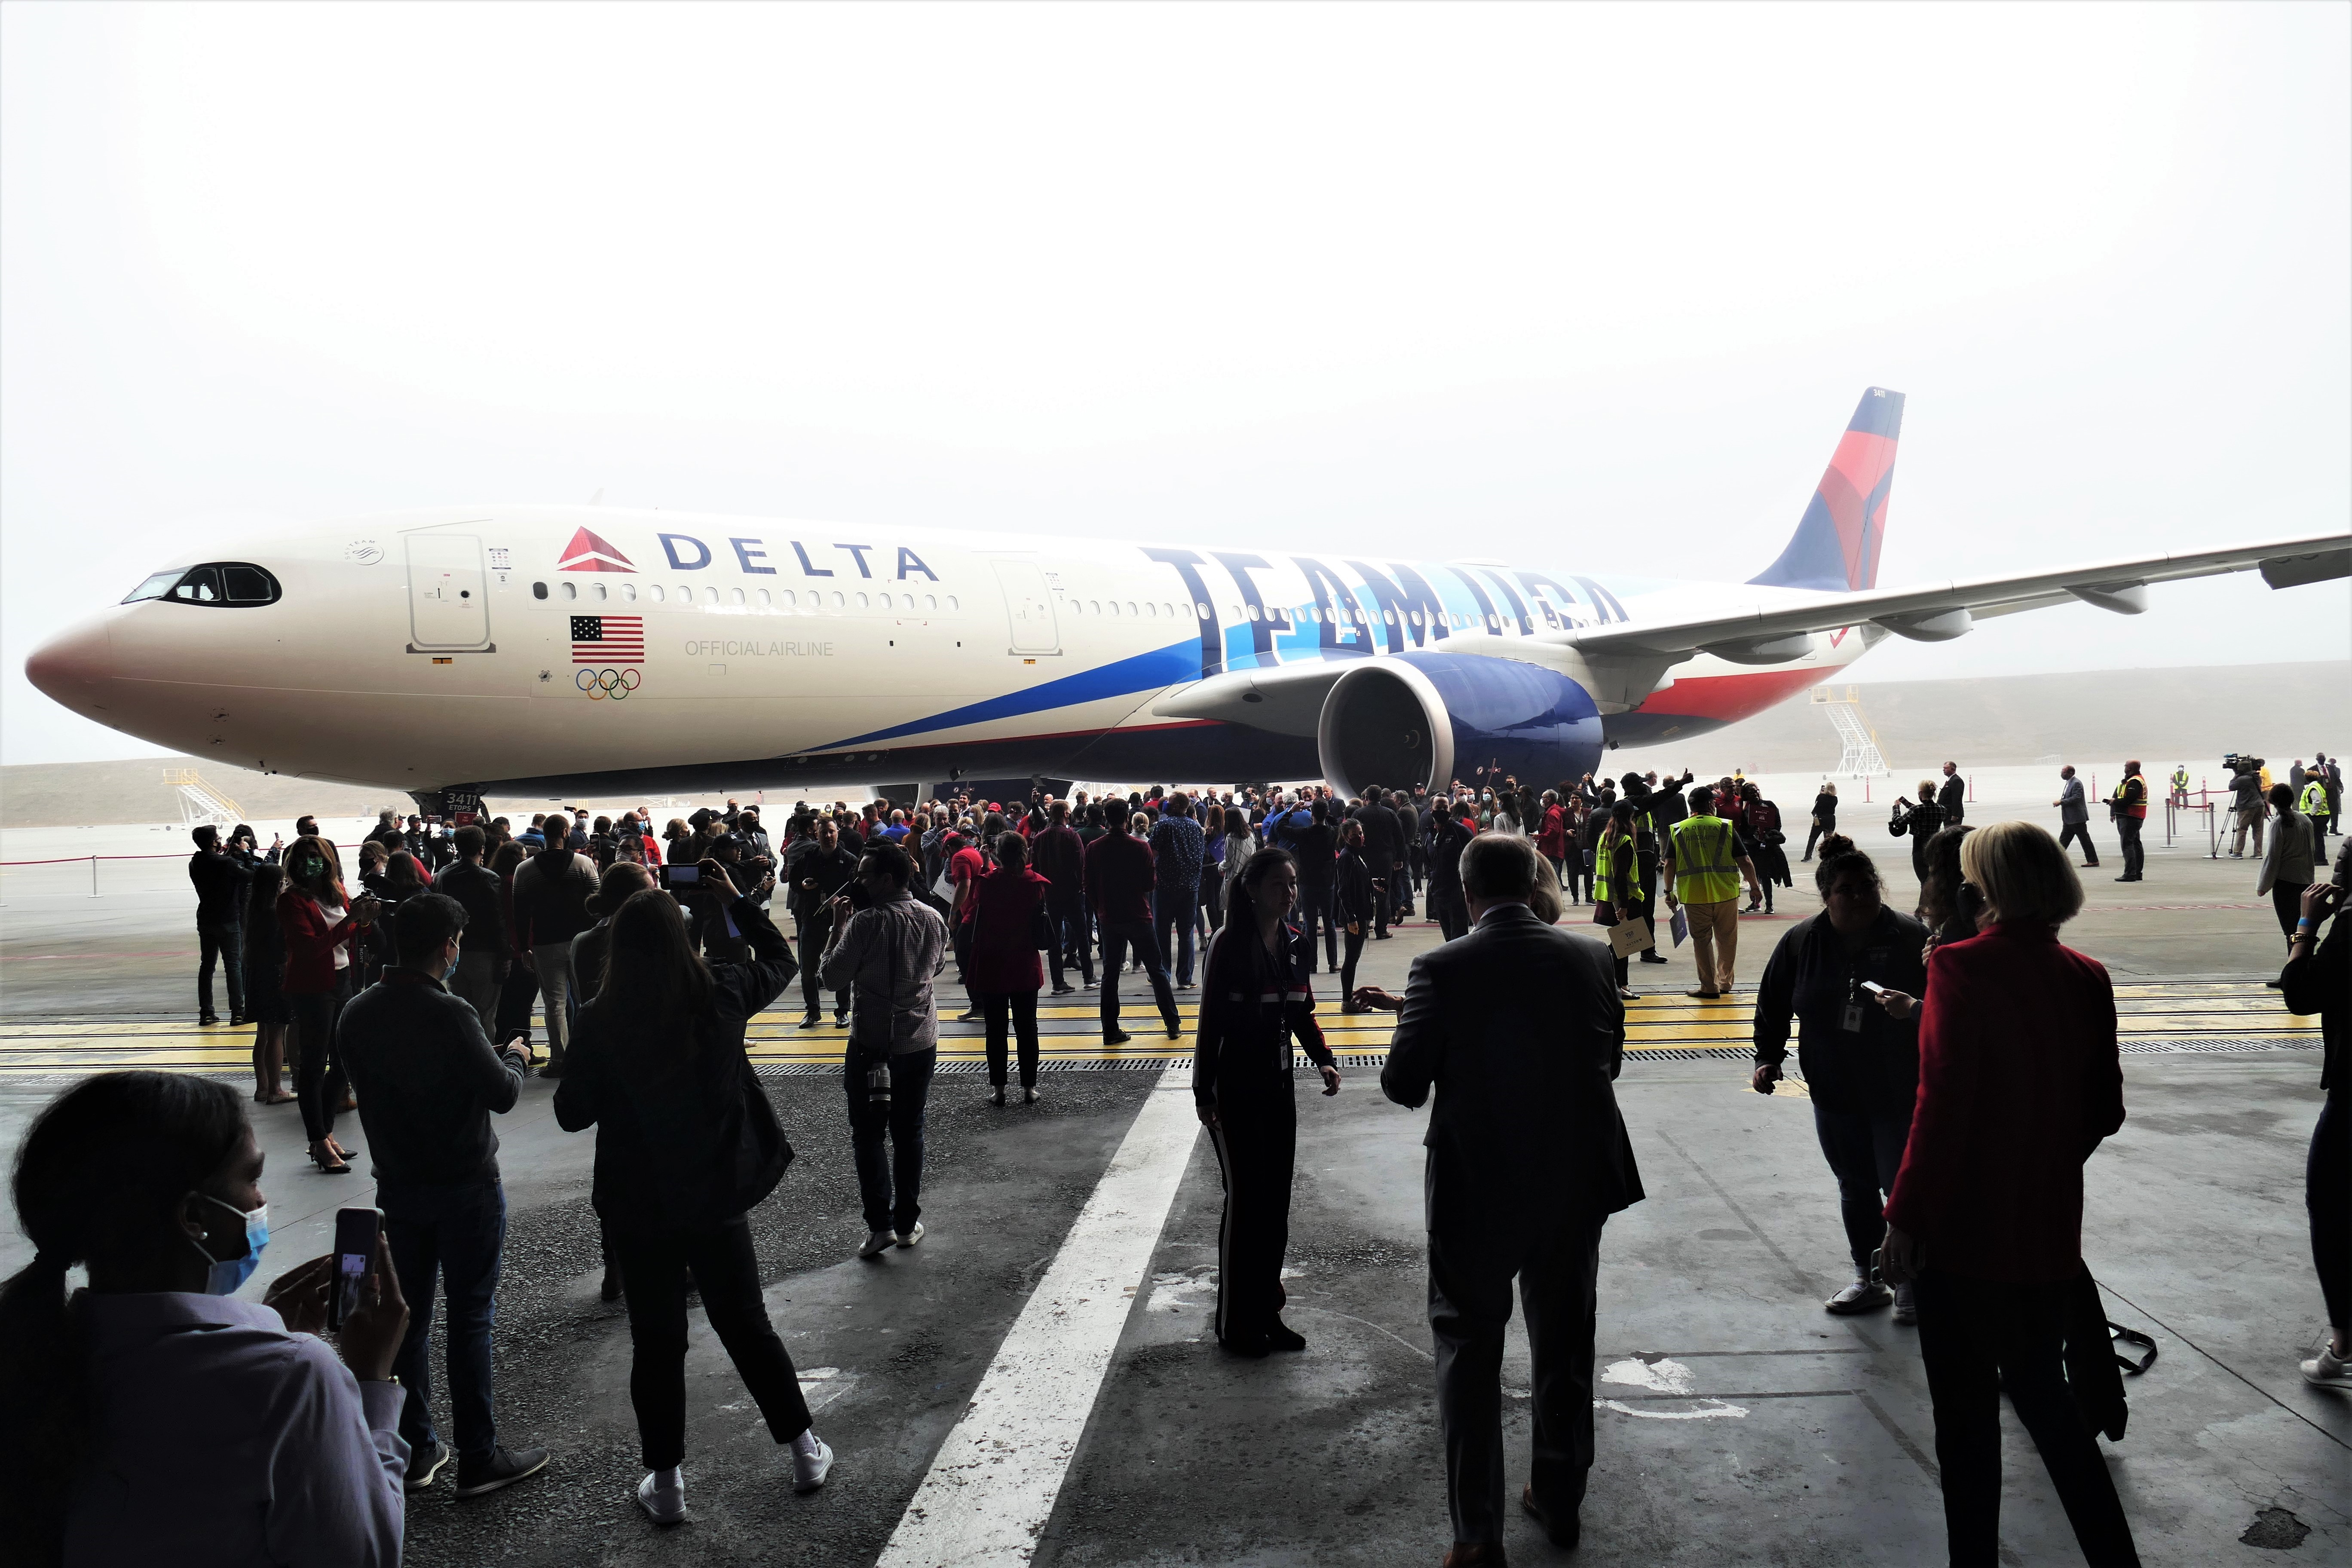 Team USA athletes pictured outside specially branded Delta Air Lines plane. Photo Credit: Shelia S. Hula